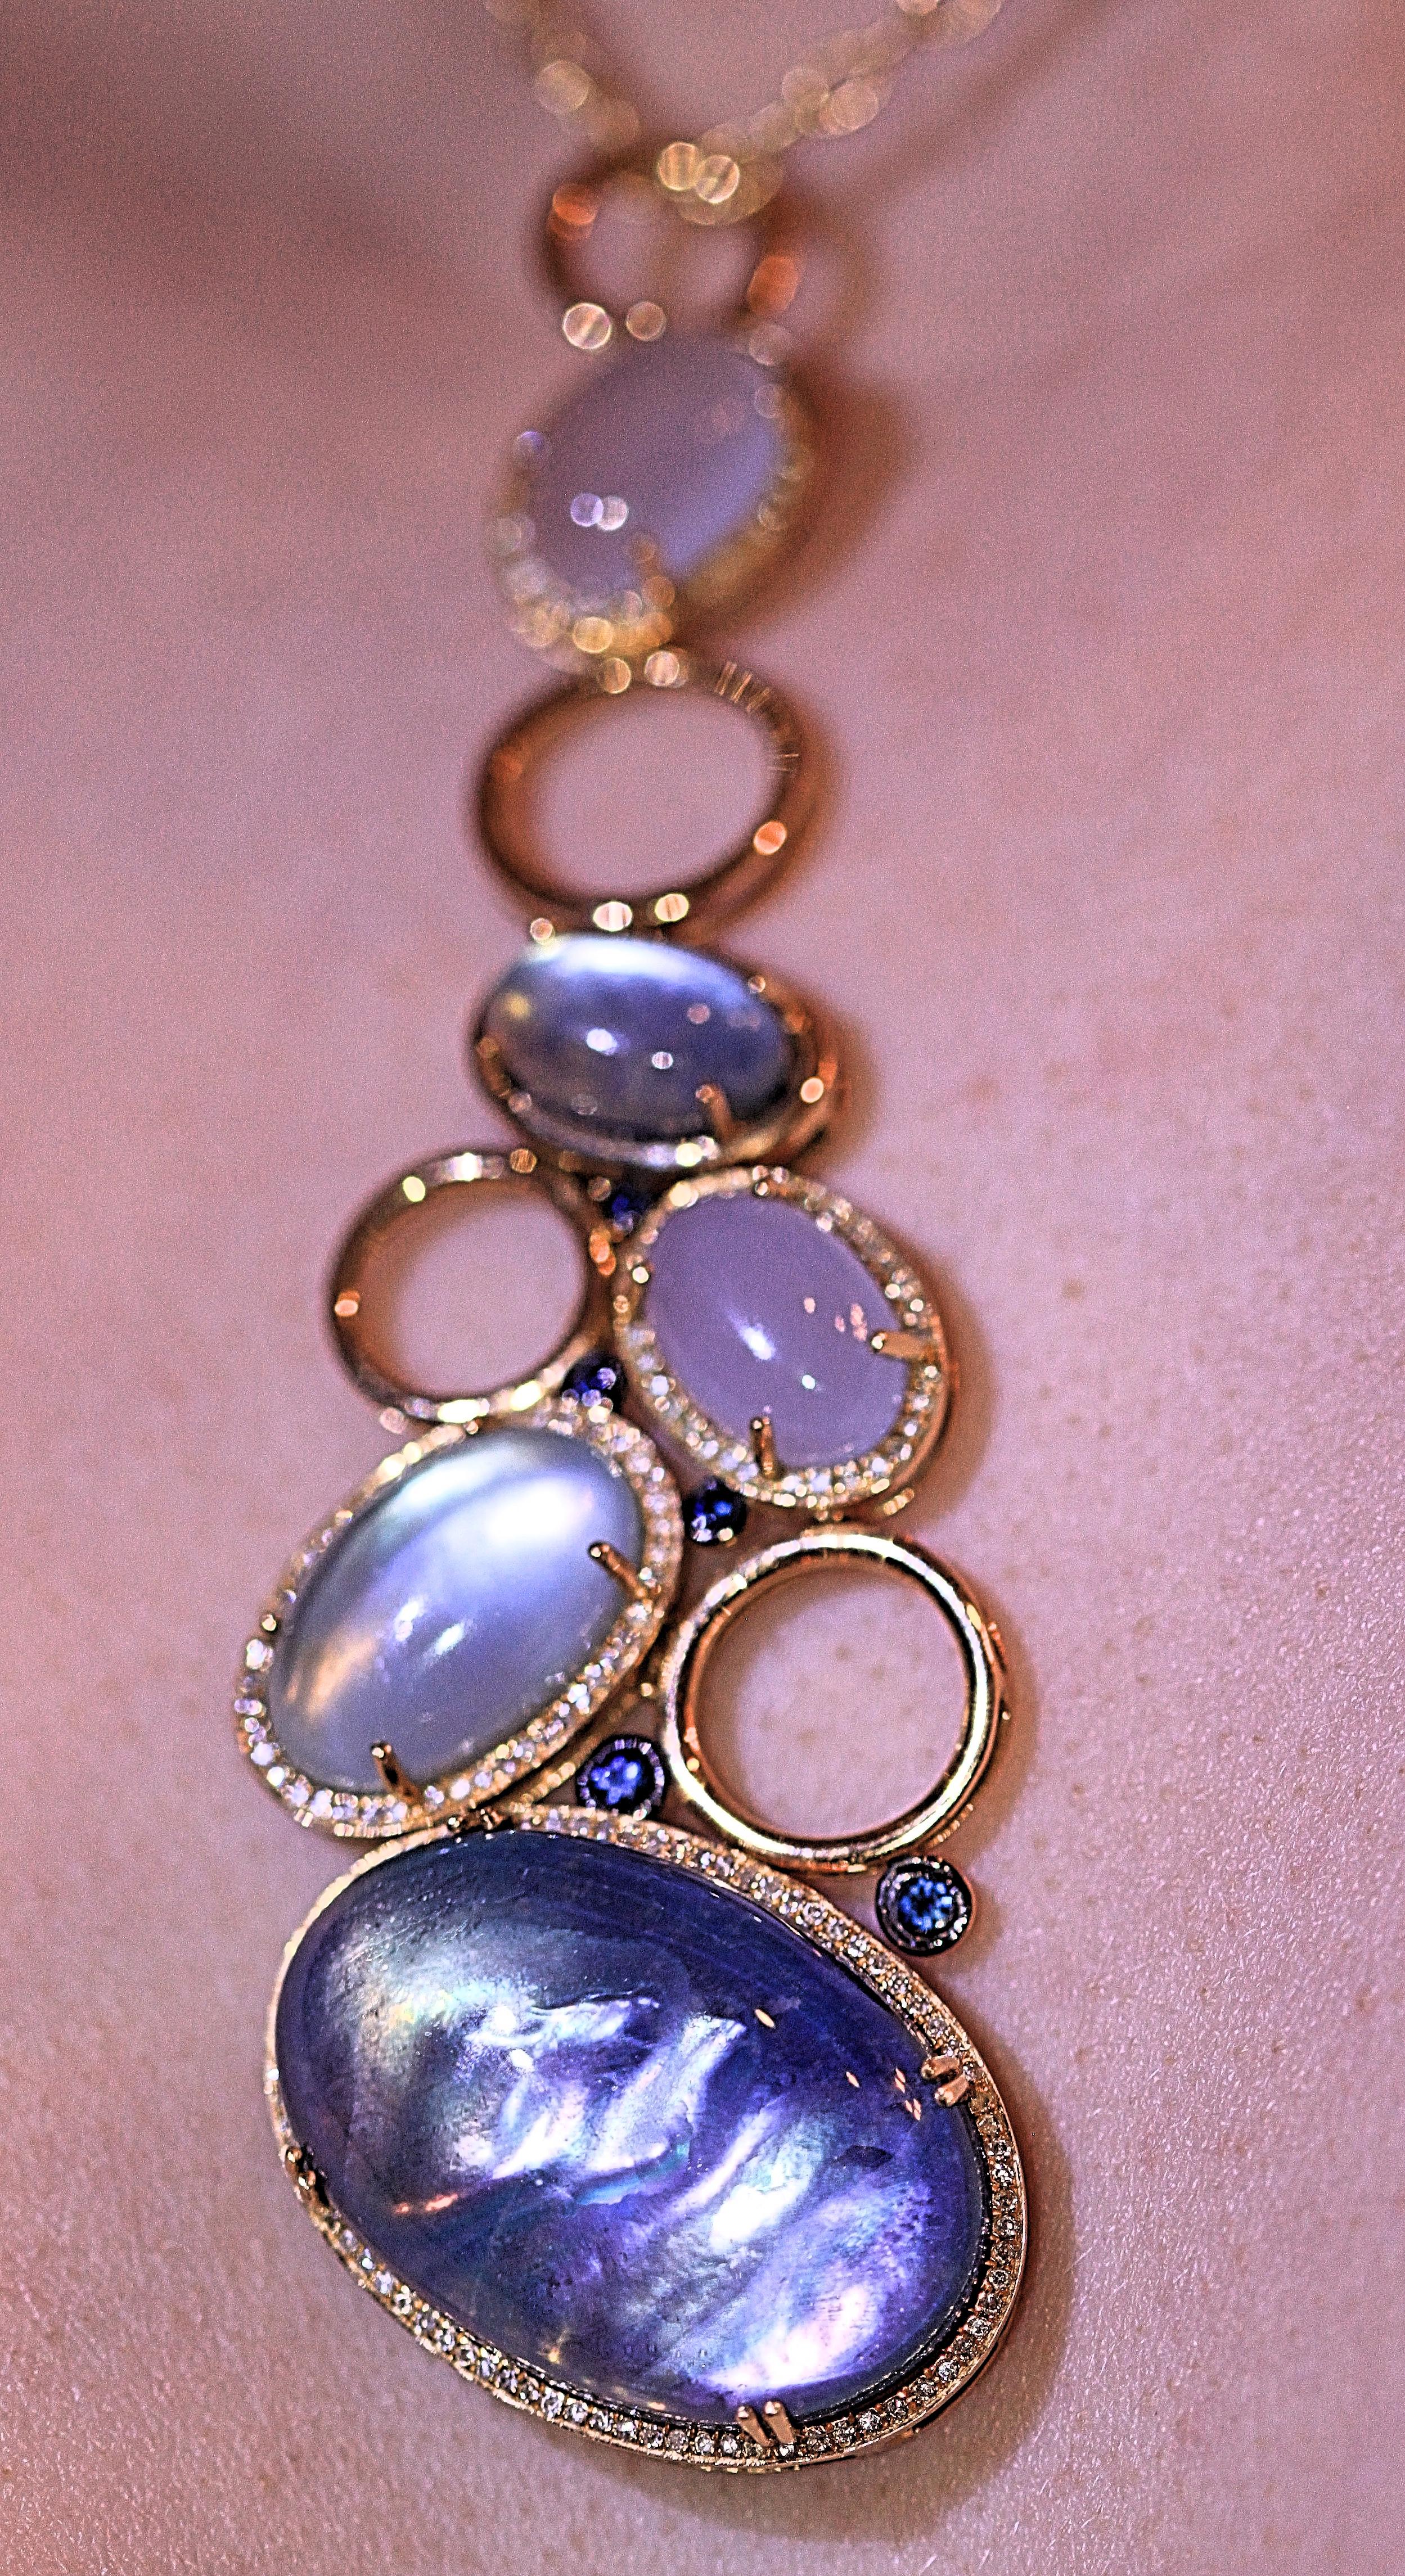 A unique large attention getting necklace.  It has five beautiful oval semi precious stones that are different shades of blue.  The pendant has five small accent sapphires and the piece measures 3 3/4 inches long with a chain that measures 16 inches